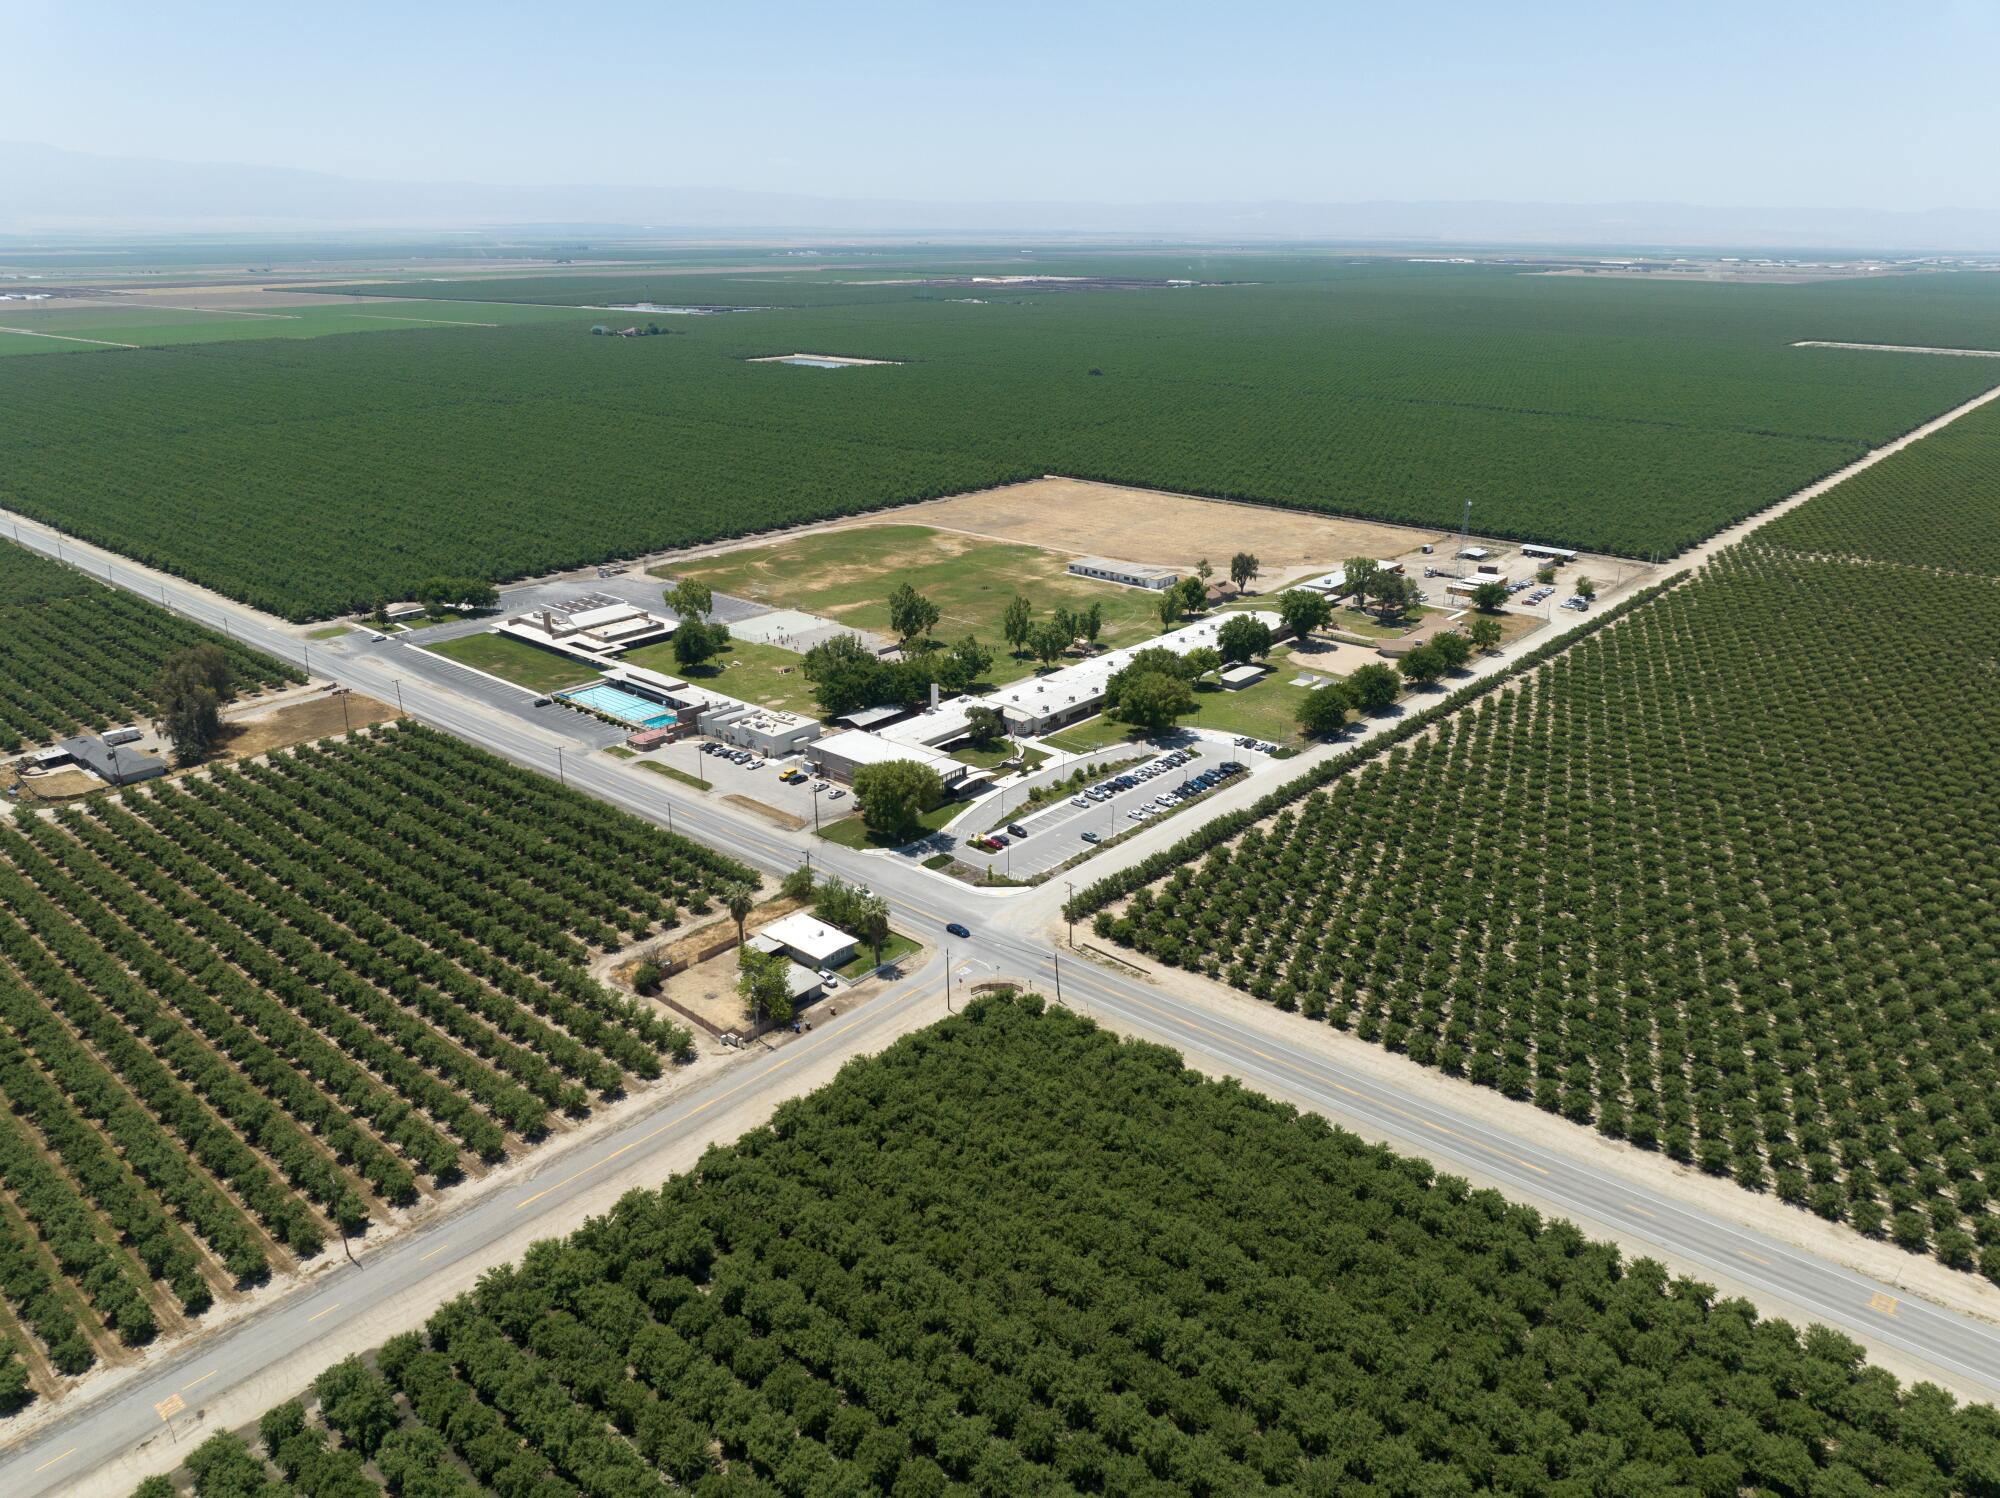 An aerial photograph shows a school campus surrounded by orchards.